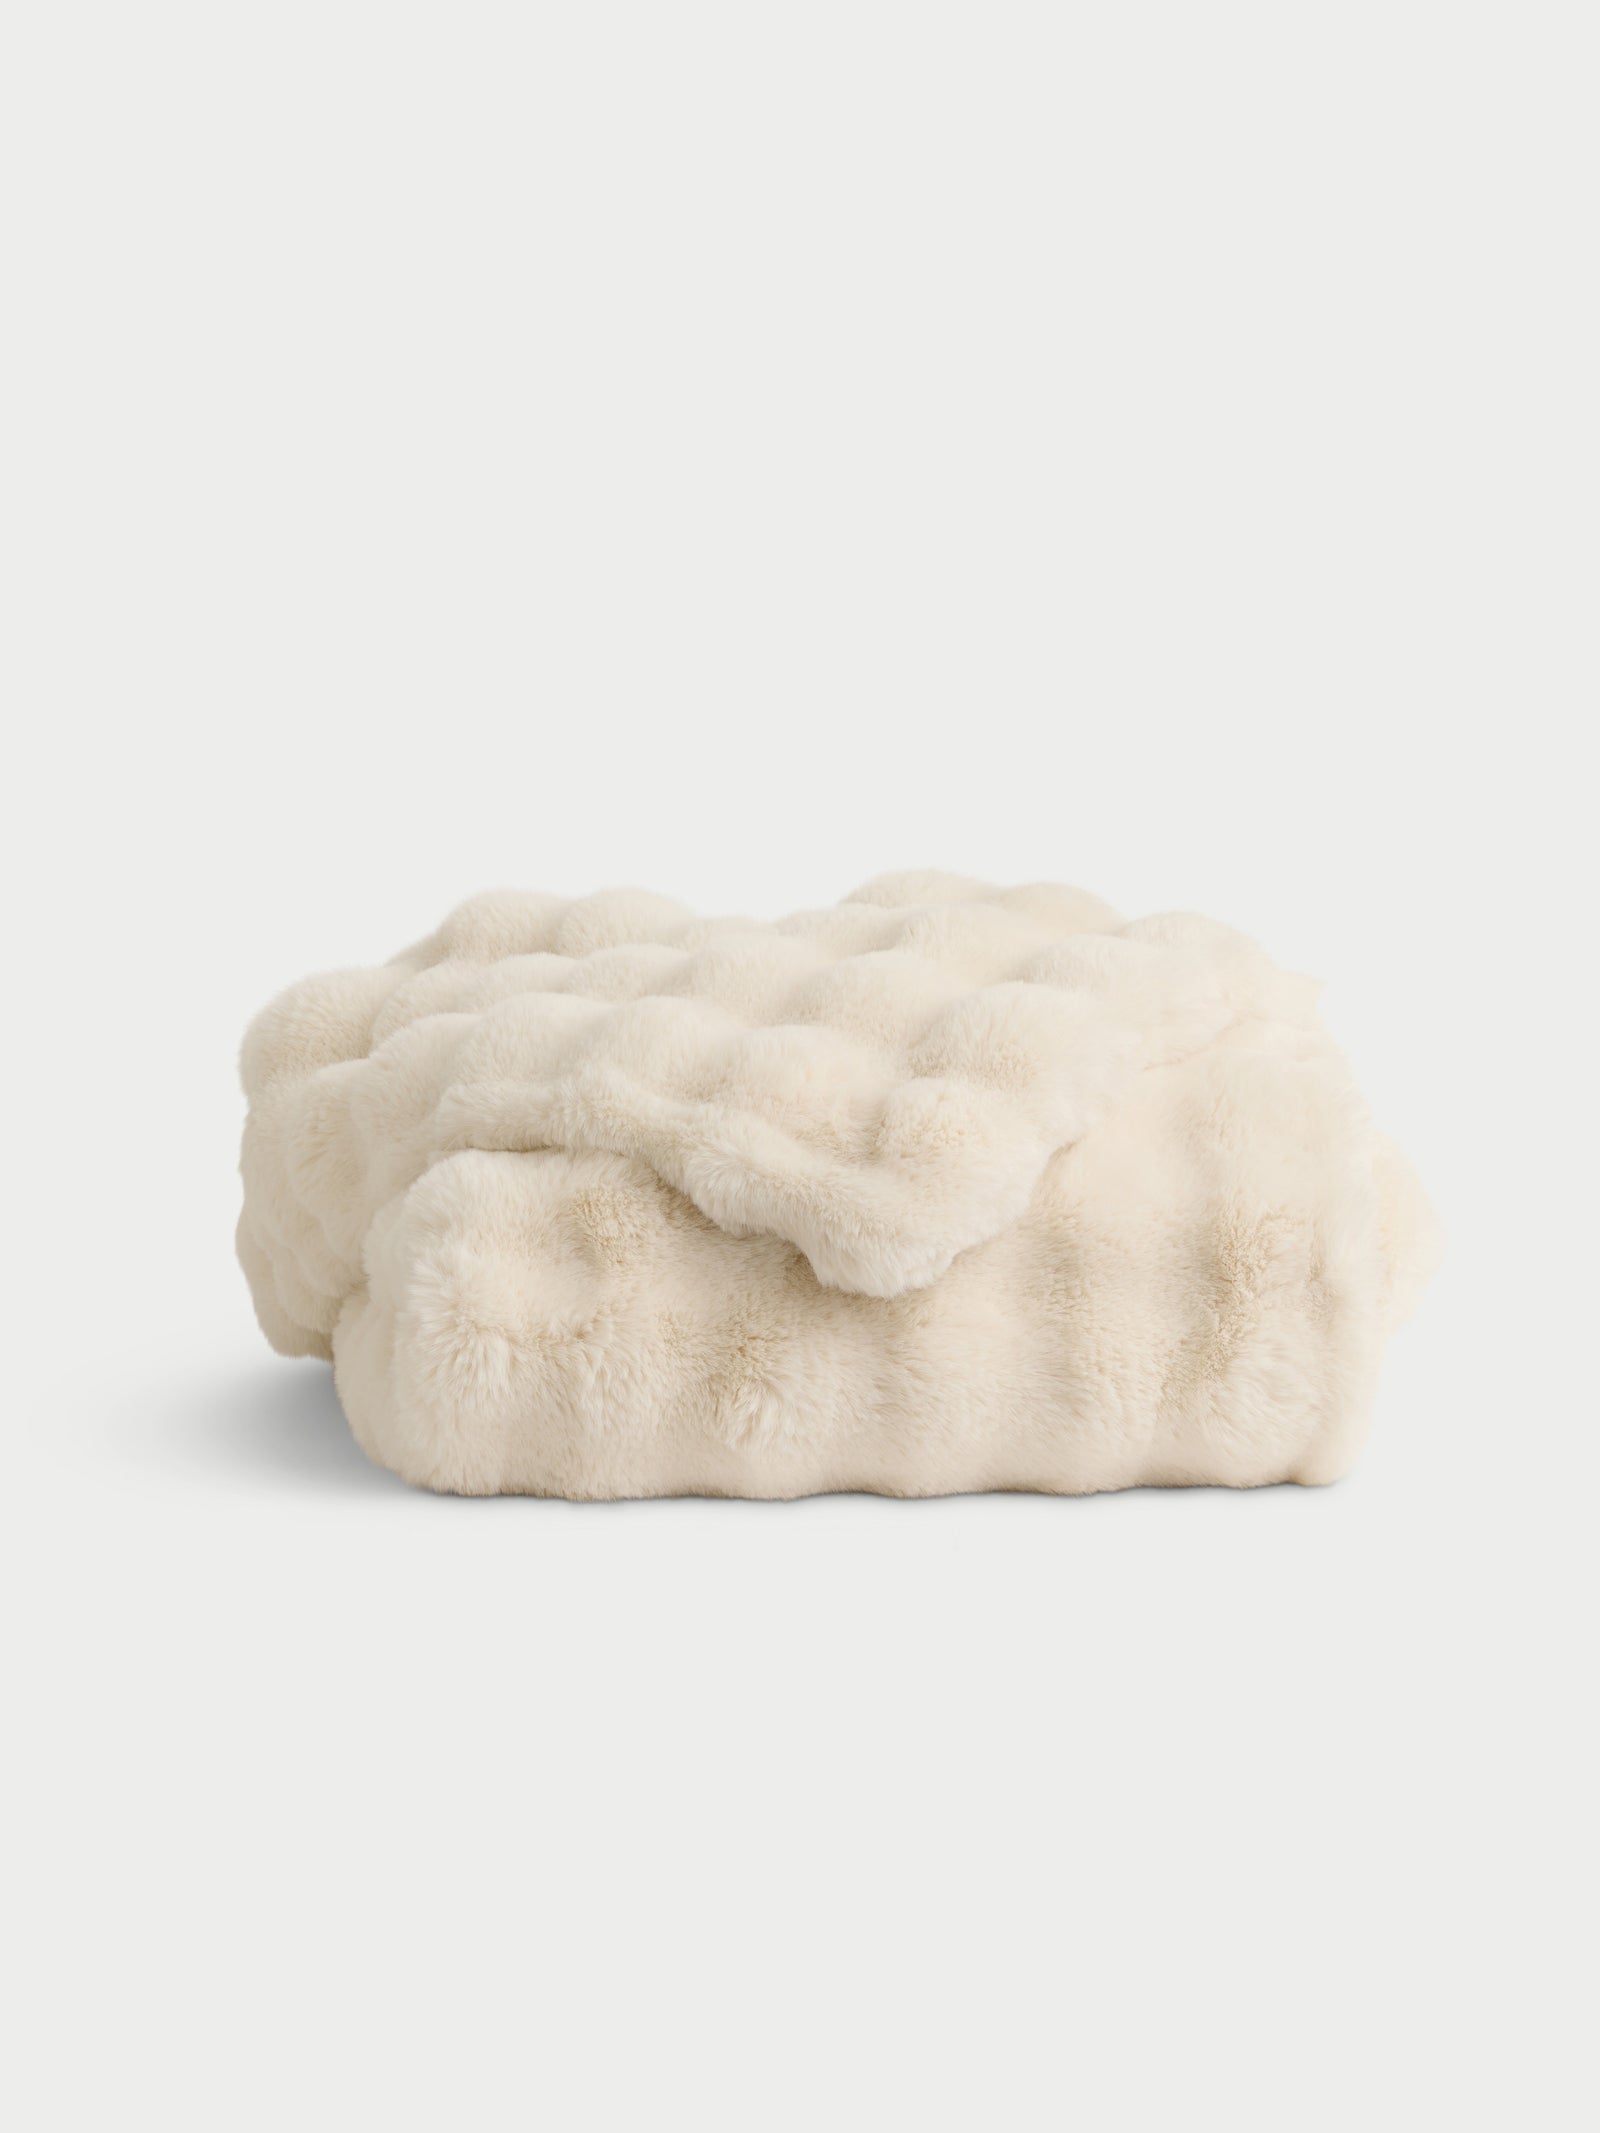 Creme lush faux fur blanket folded with white background 